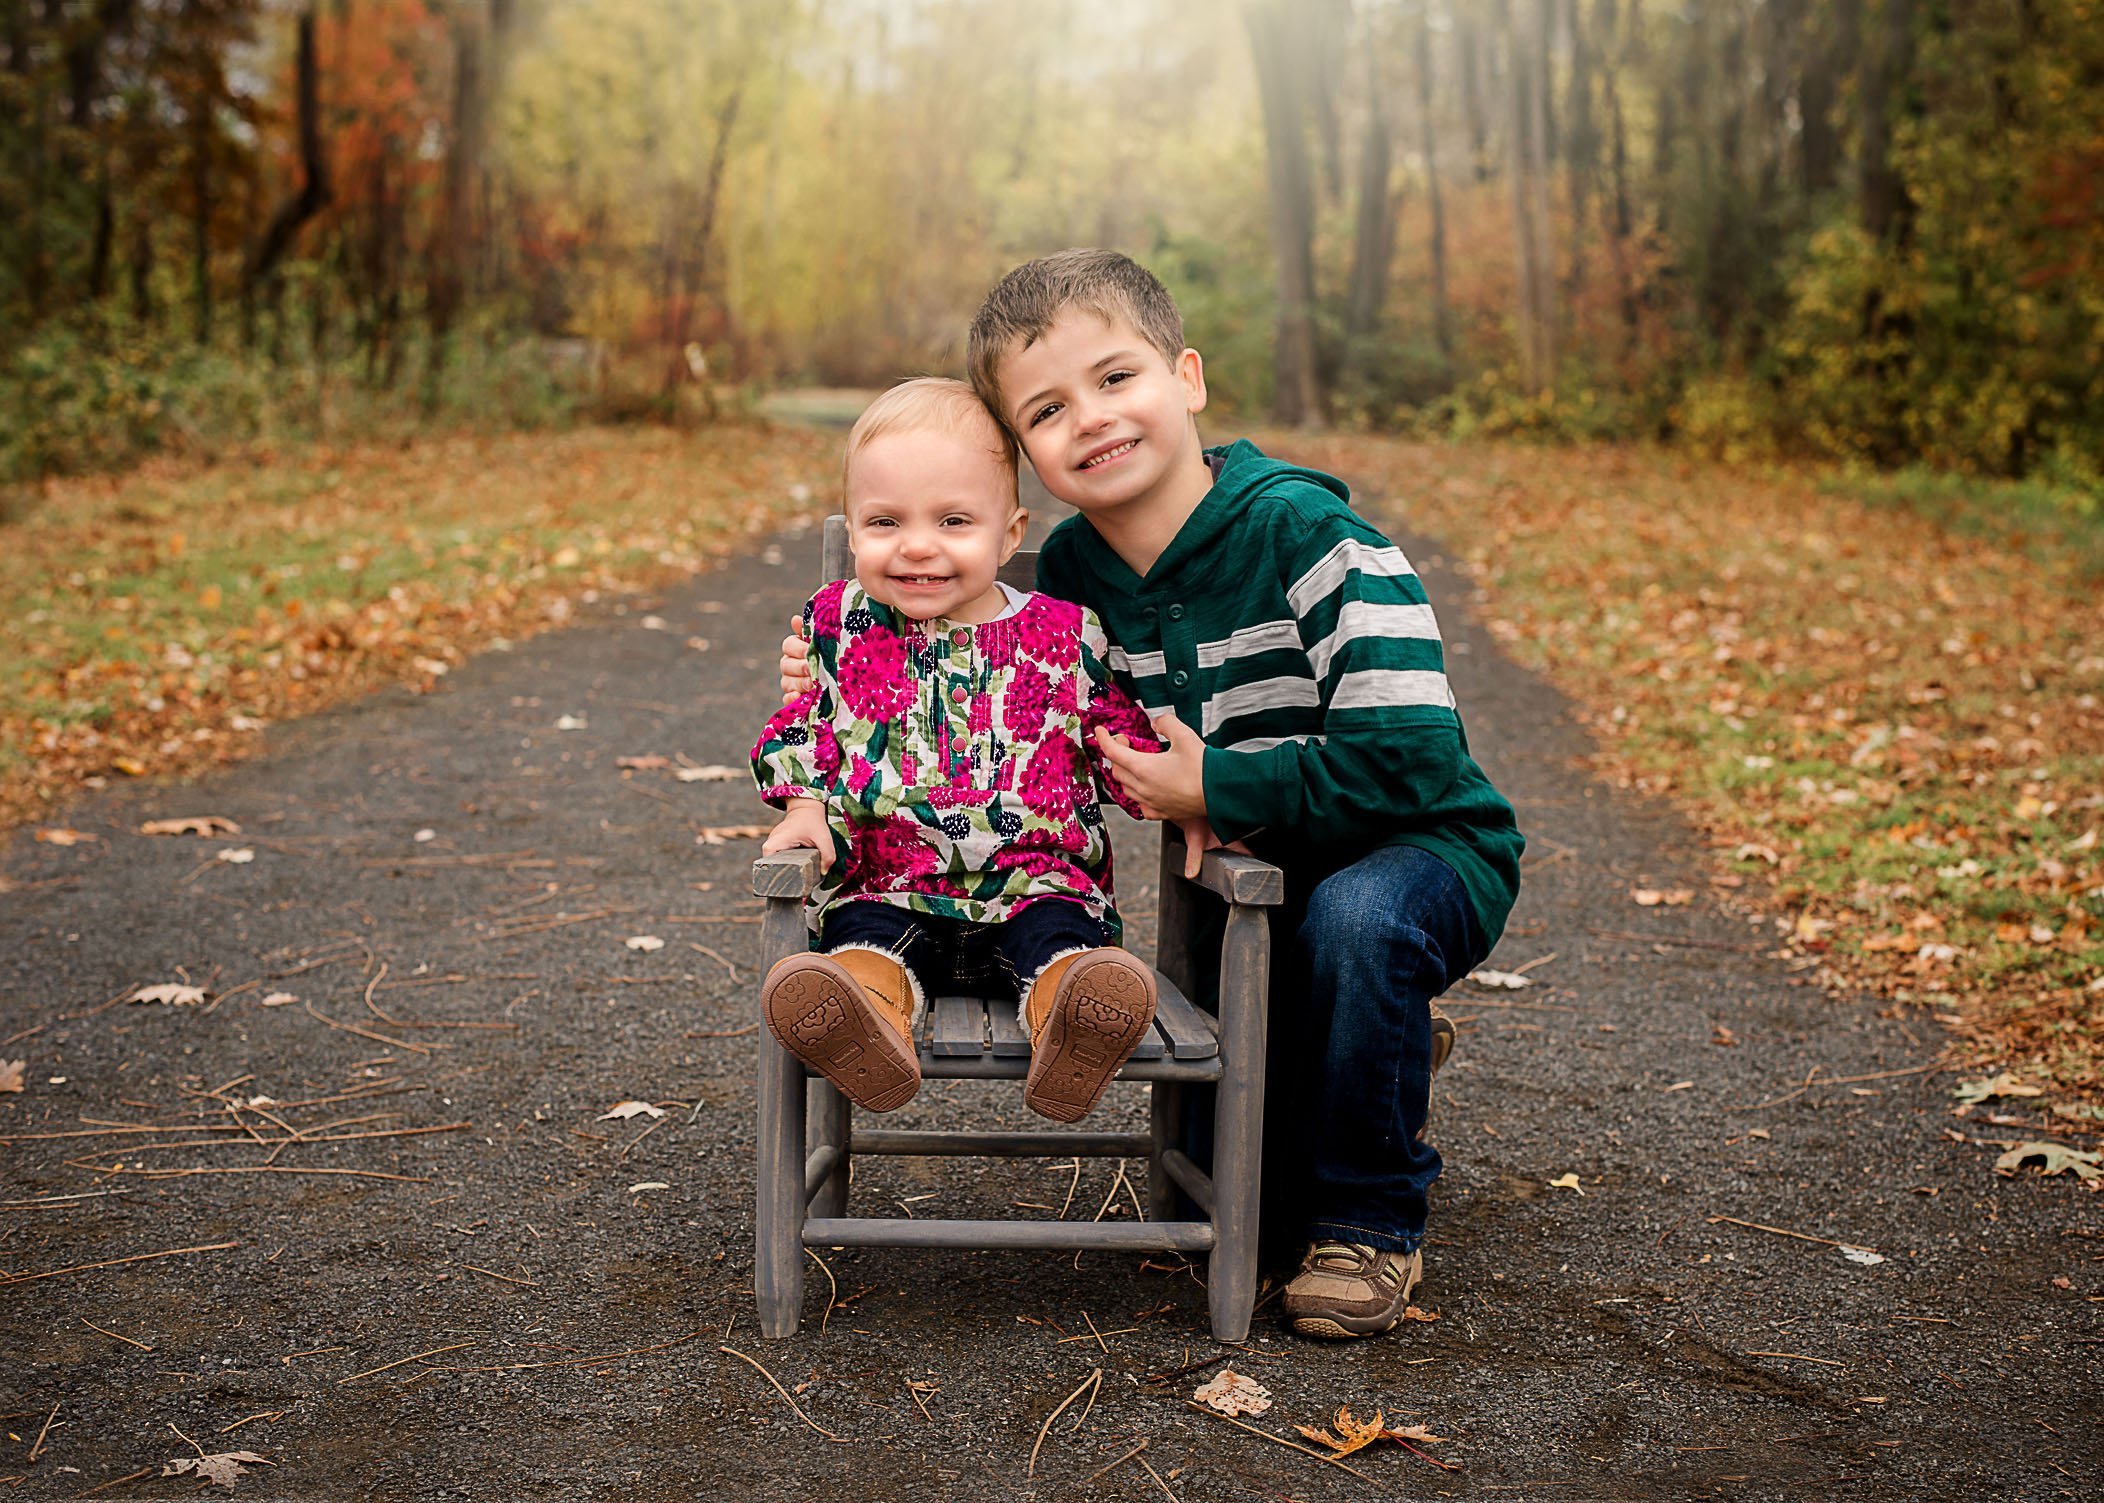 4 year old brother and 1 year old sister sitting in chair outside on path in Fall